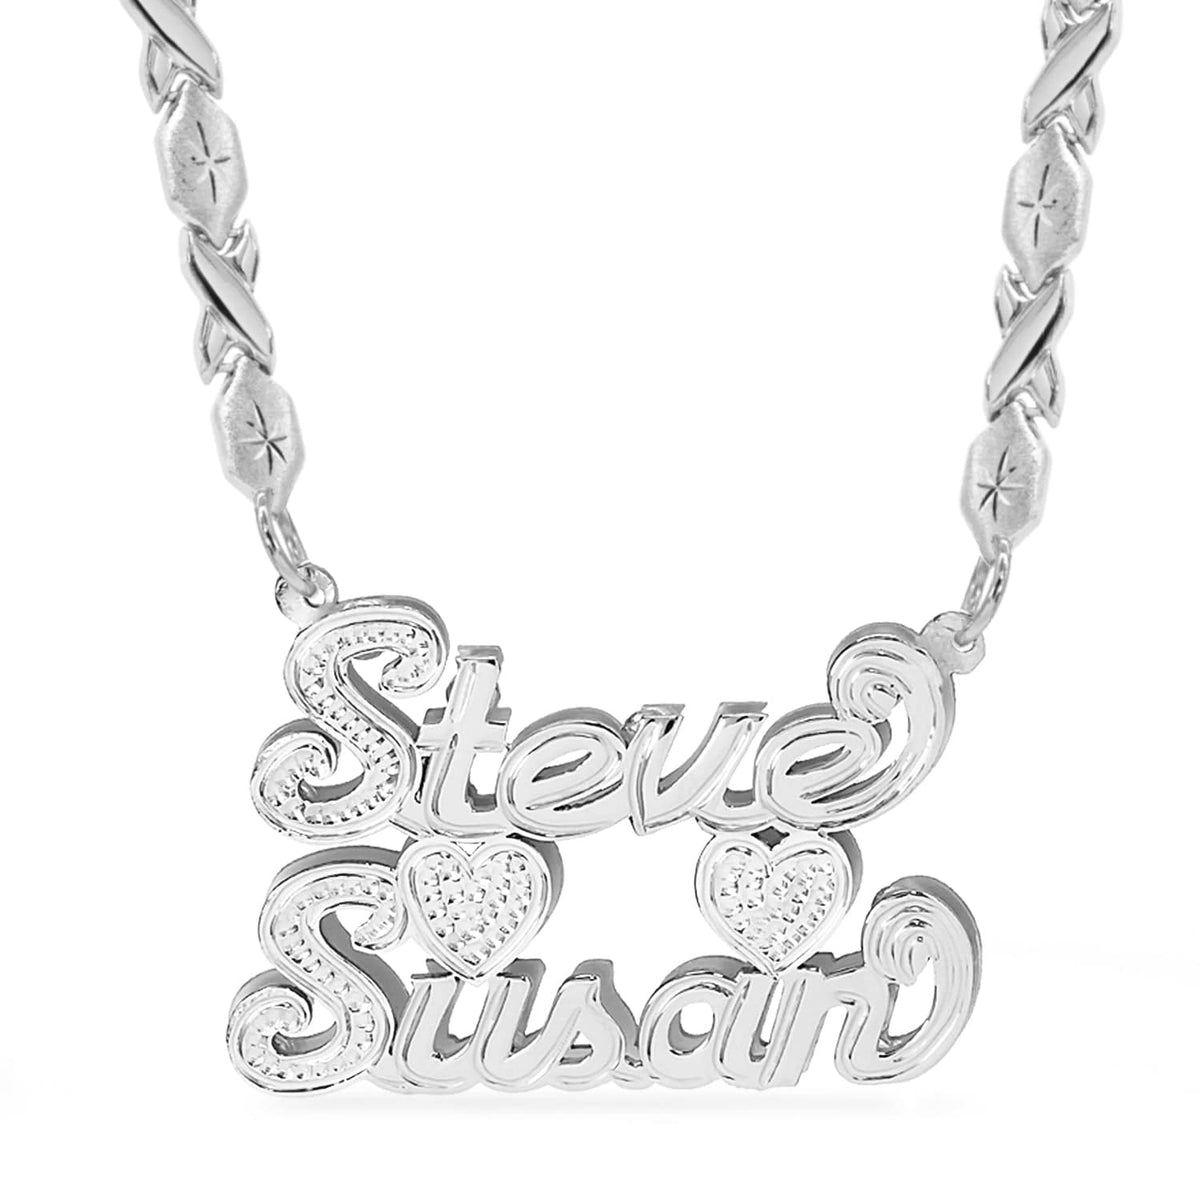 Sterling Silver / Xoxo Chain Double Plated Name Necklace - Couples - Best Friends